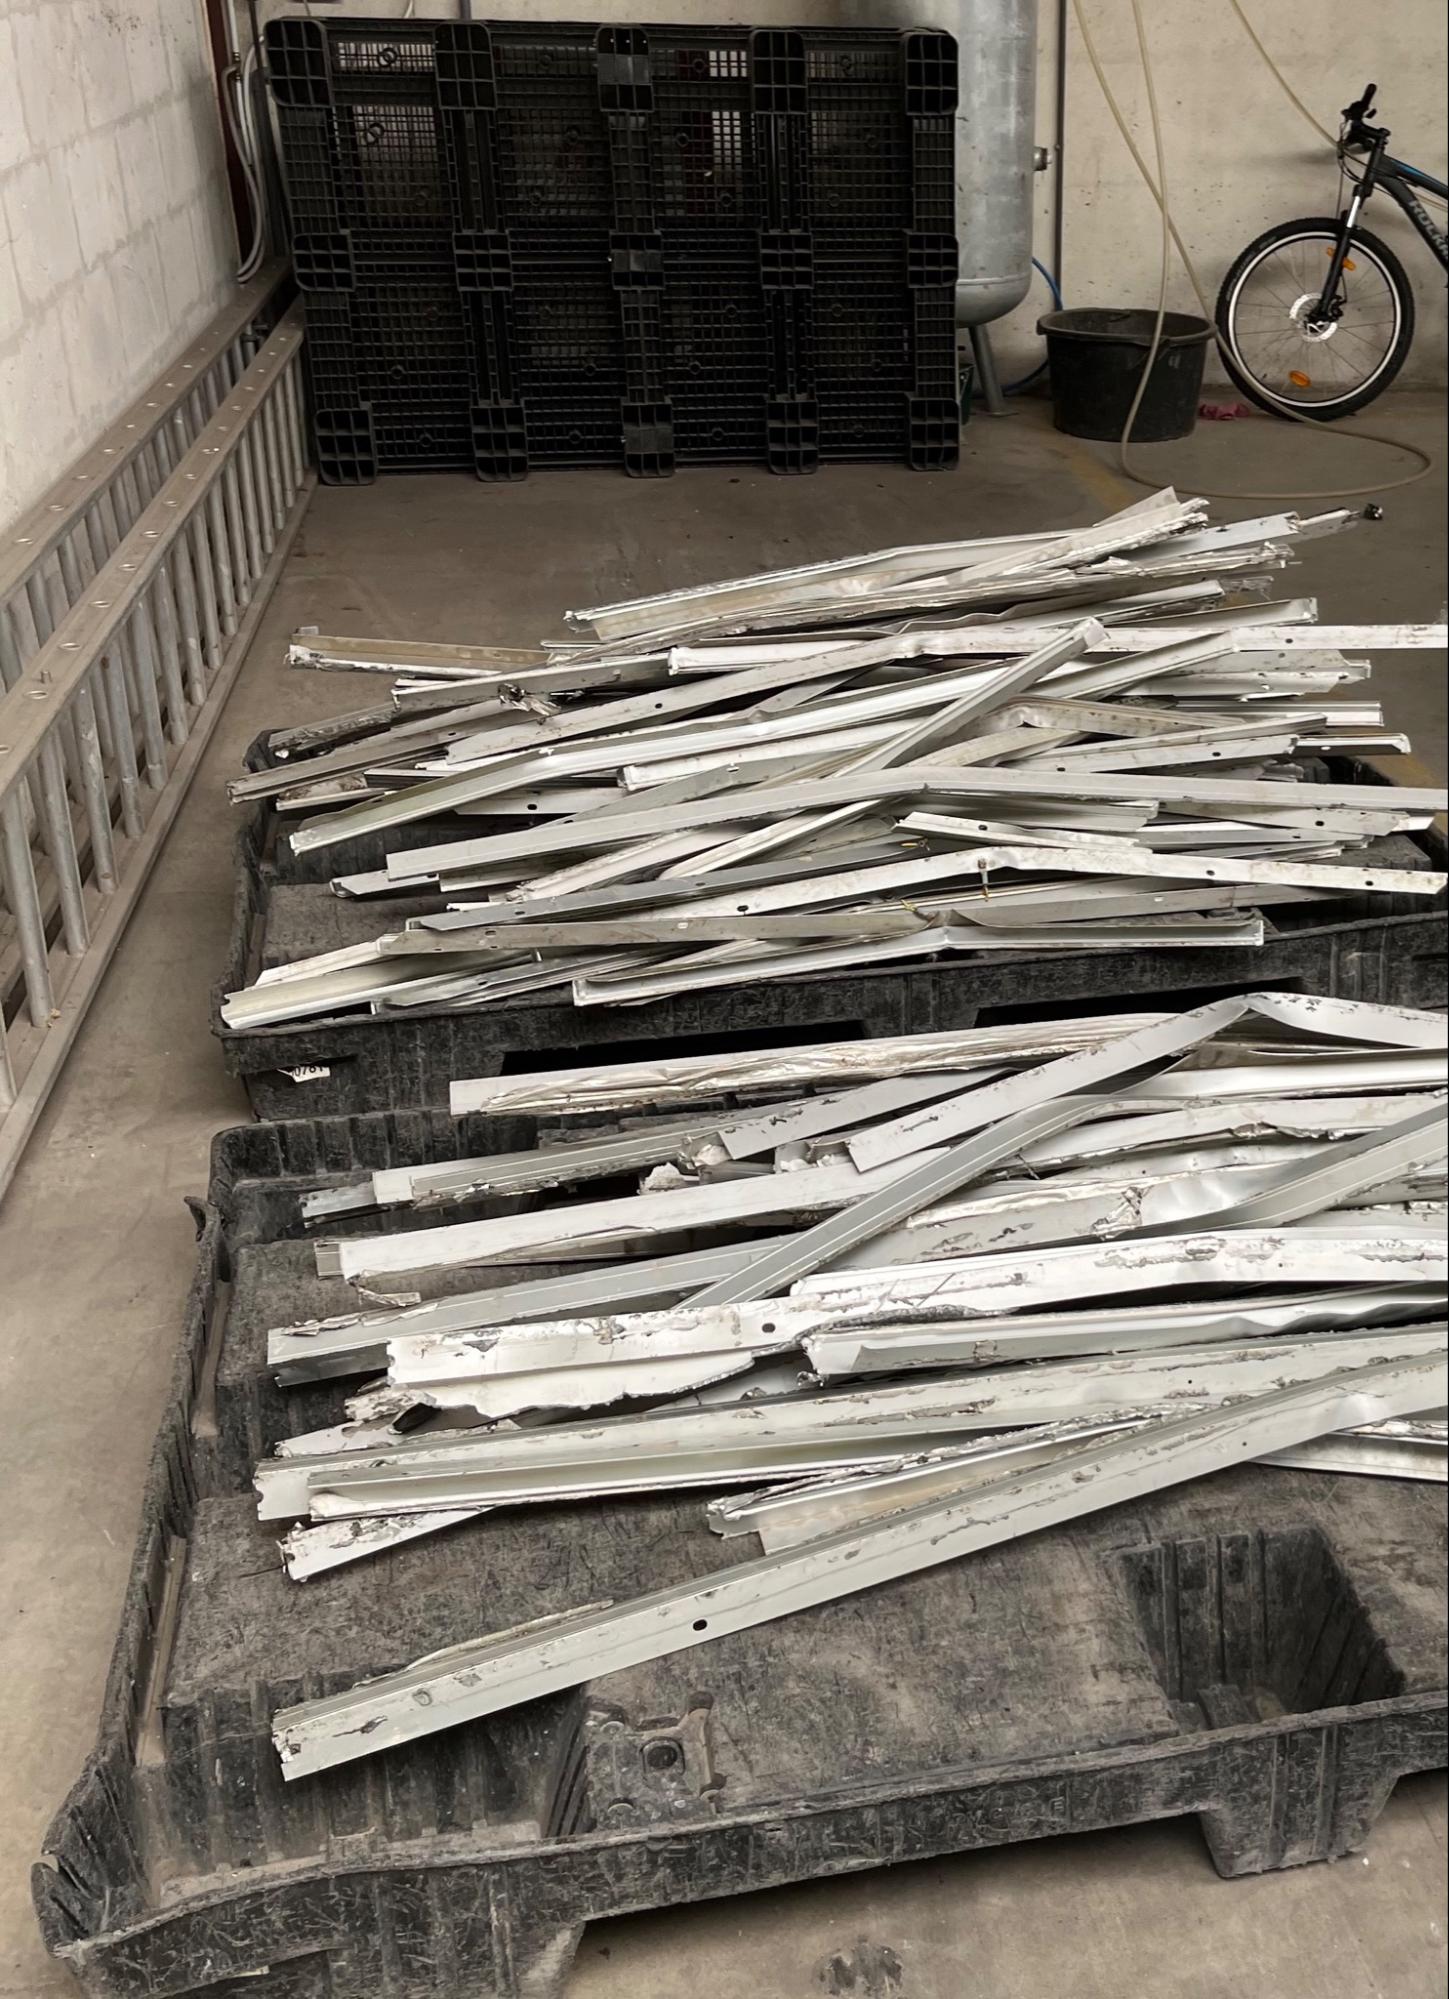 Aluminum Manually Sorted in Piles